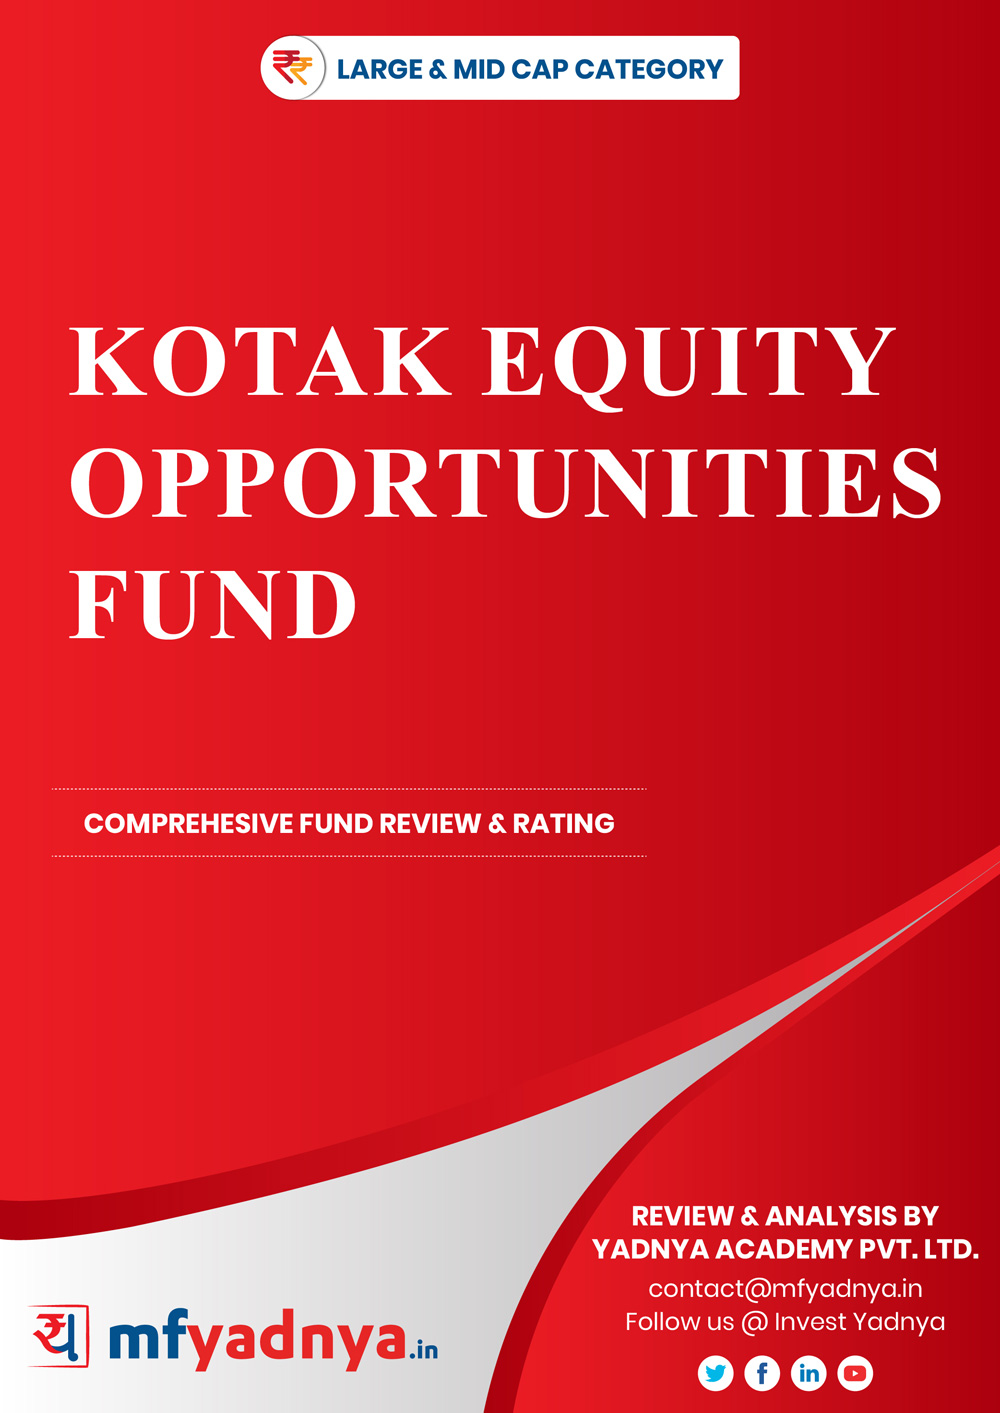 Learn in detail about Kotak Equity Opportunities Fund from this ebook from Investyadna. Find information about the fund's return, ratio, allocation etc. ✔Mutual Fund Analysis ✔Latest Reviews.